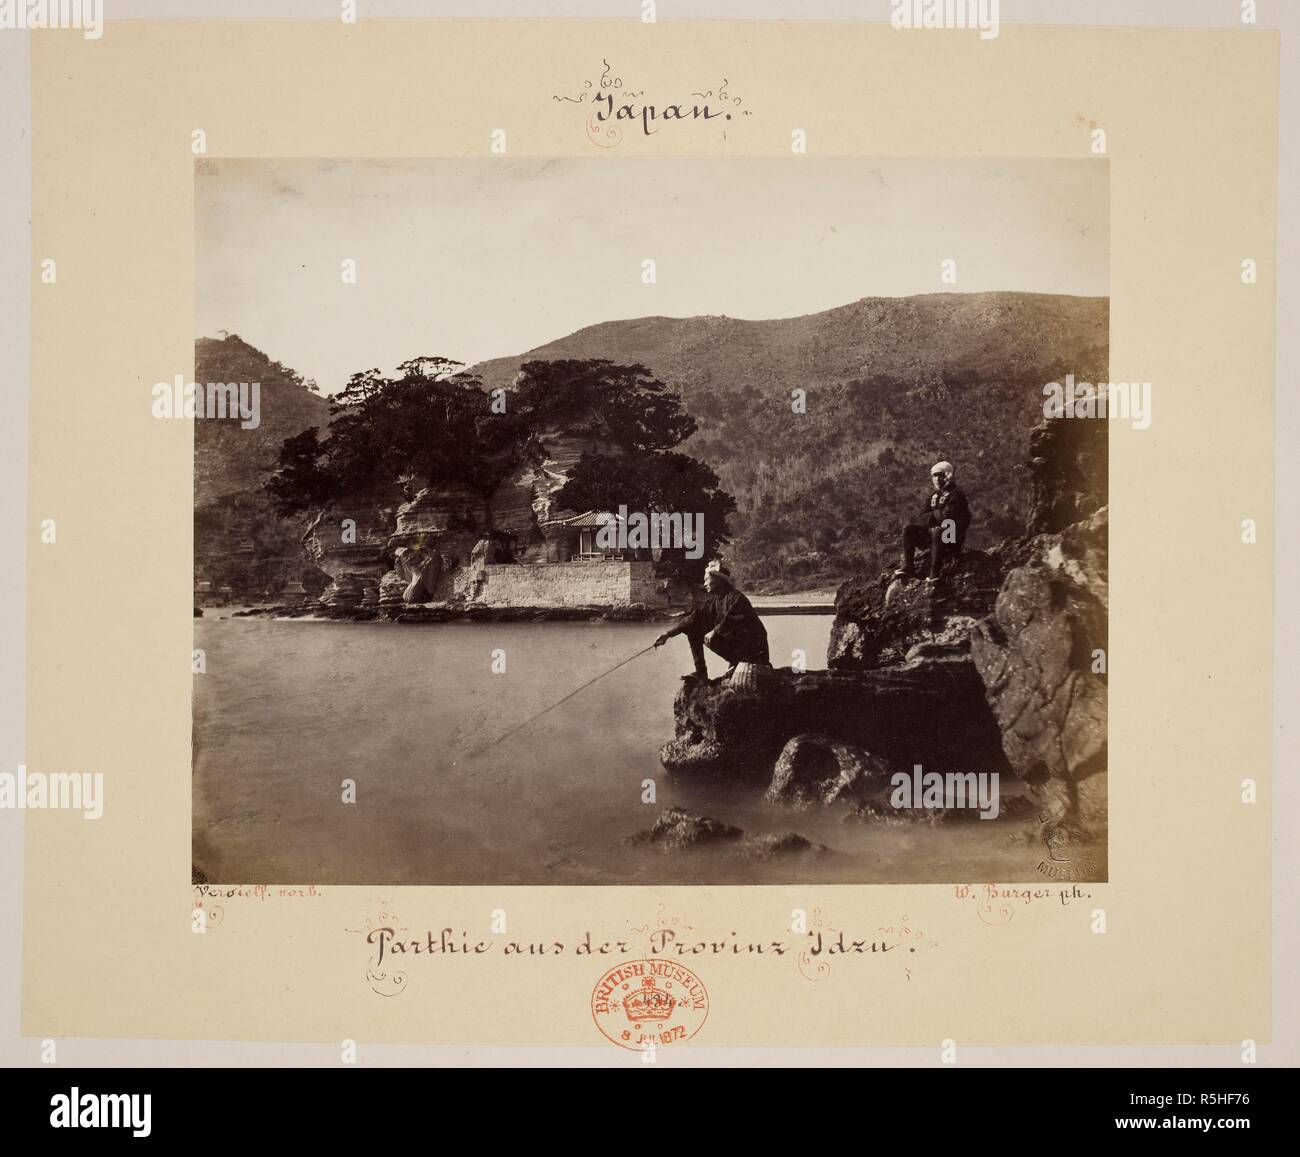 Japanese fishing in province Idsu (Izu peninsula.) . [A Series of 56 Views of Towns, Villages ... in] Japan. W. Burger ph. Japan, c.1869. Source: Maps.8.d.24 plate 55. Stock Photo